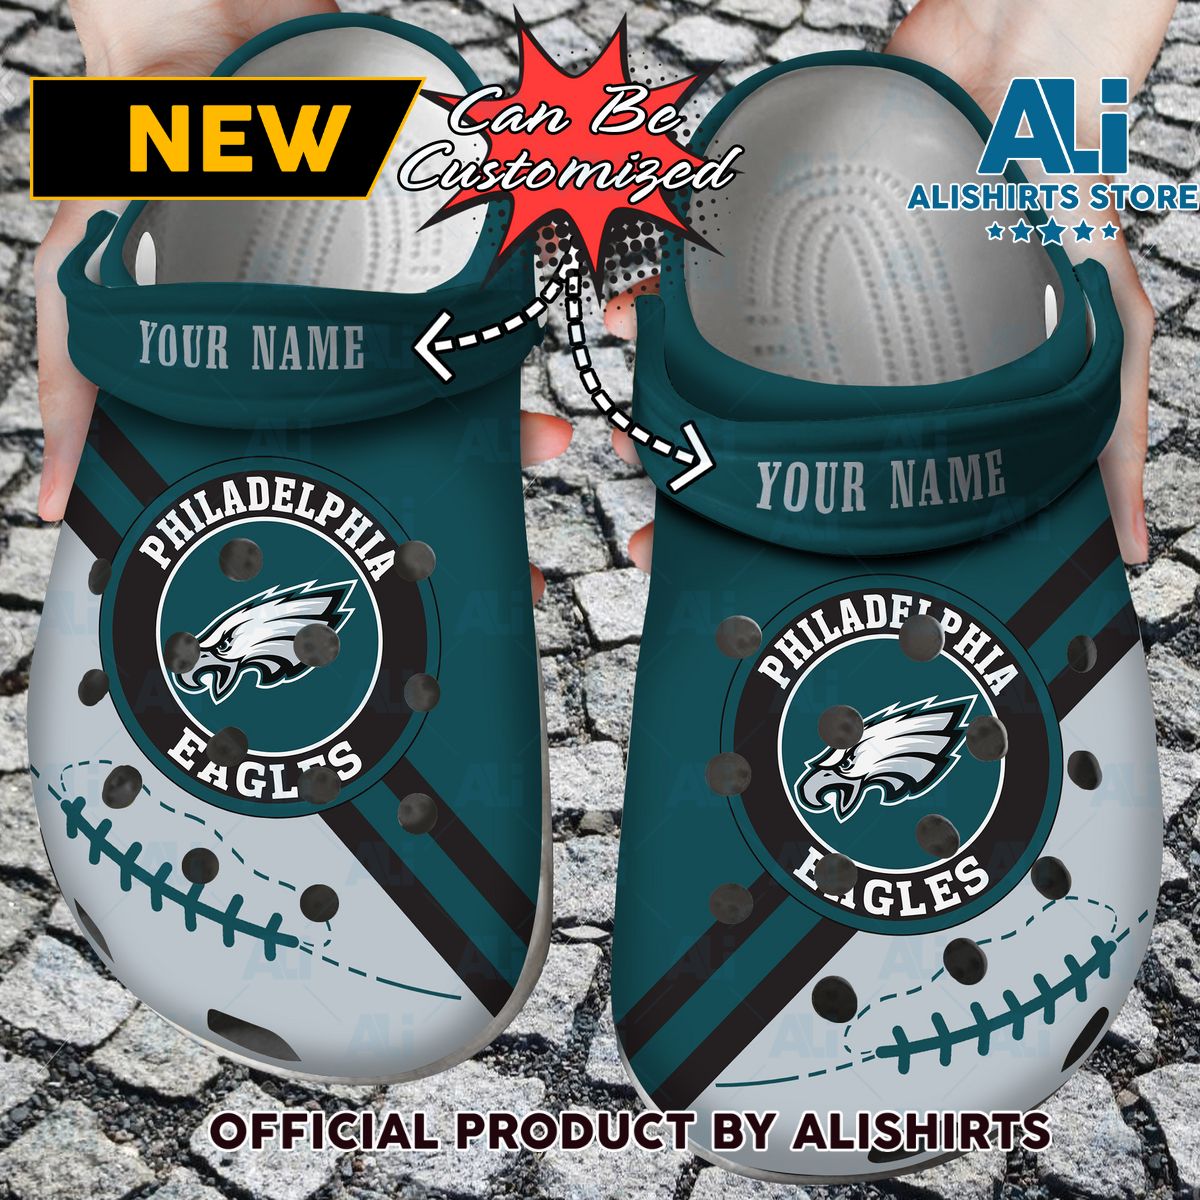 Personalized P.Eagles Football Team Rugby Crocs Crocband Clog Shoes